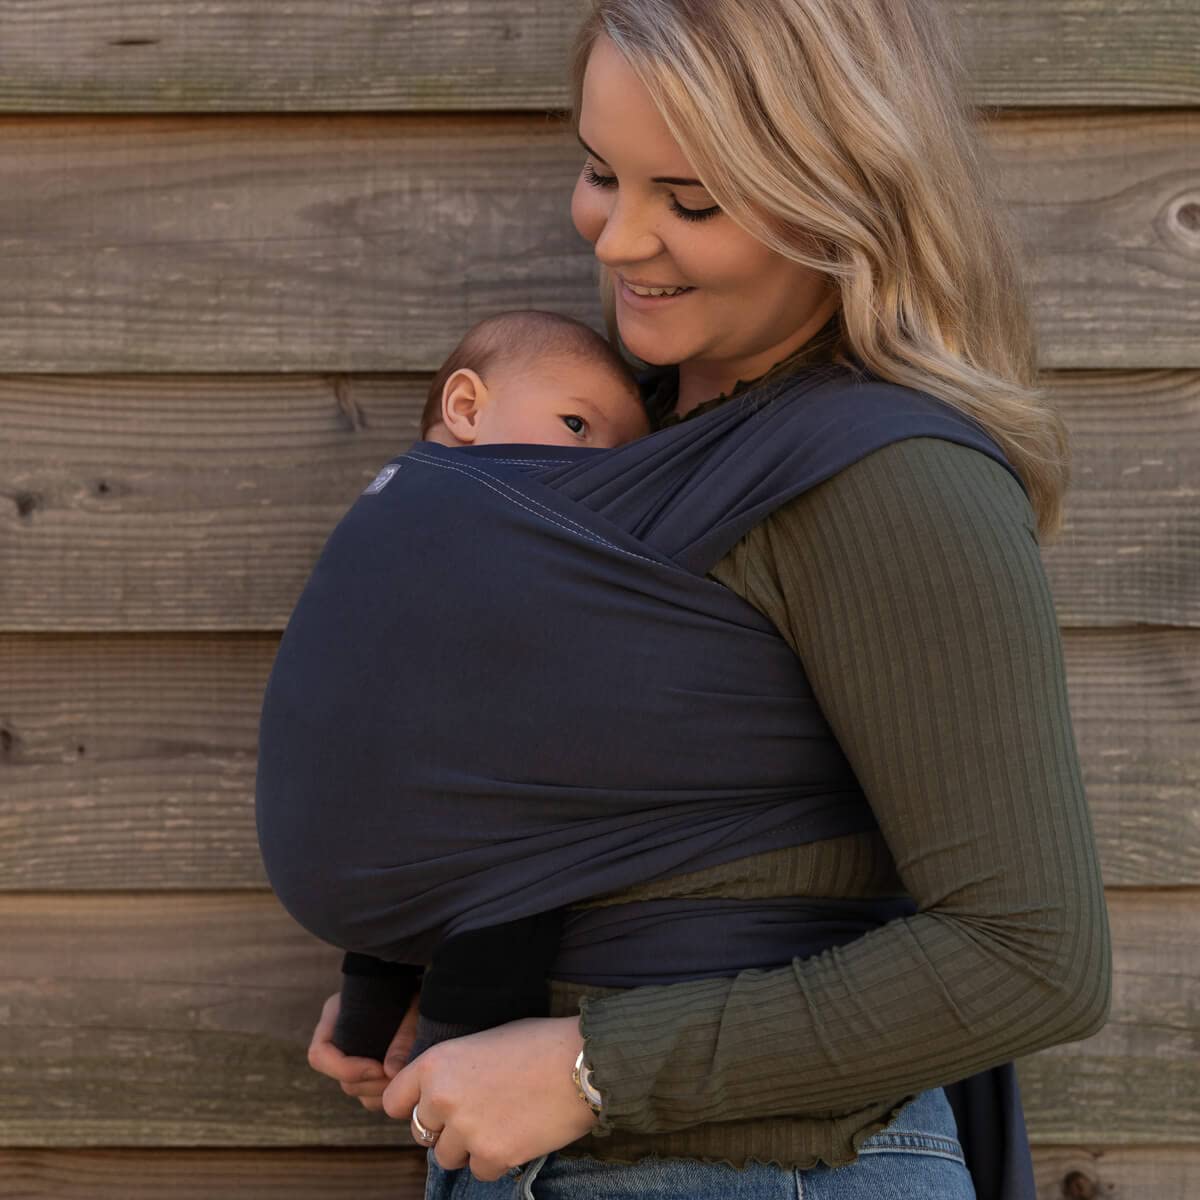 Hoppediz Elastic Baby Sling For Premature And Newborn Babies, Including Carrying Instructions charcoal